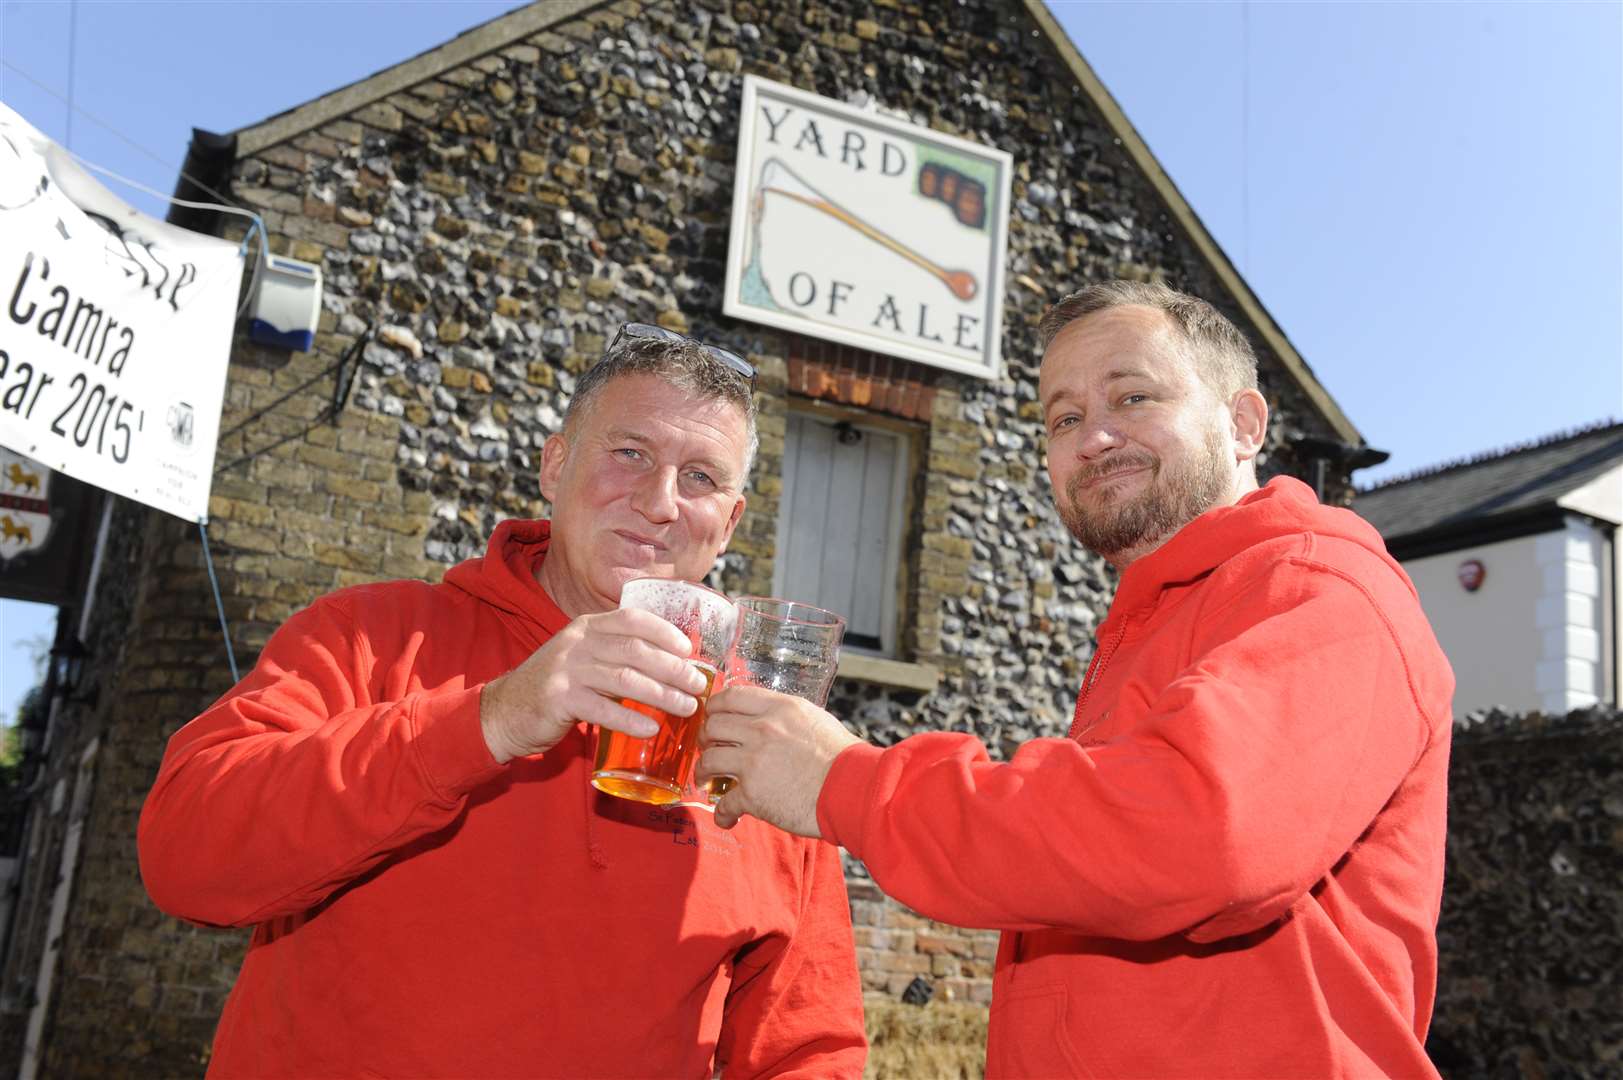 The Yard of Ale owners Shawn Galvin and Ian Noble